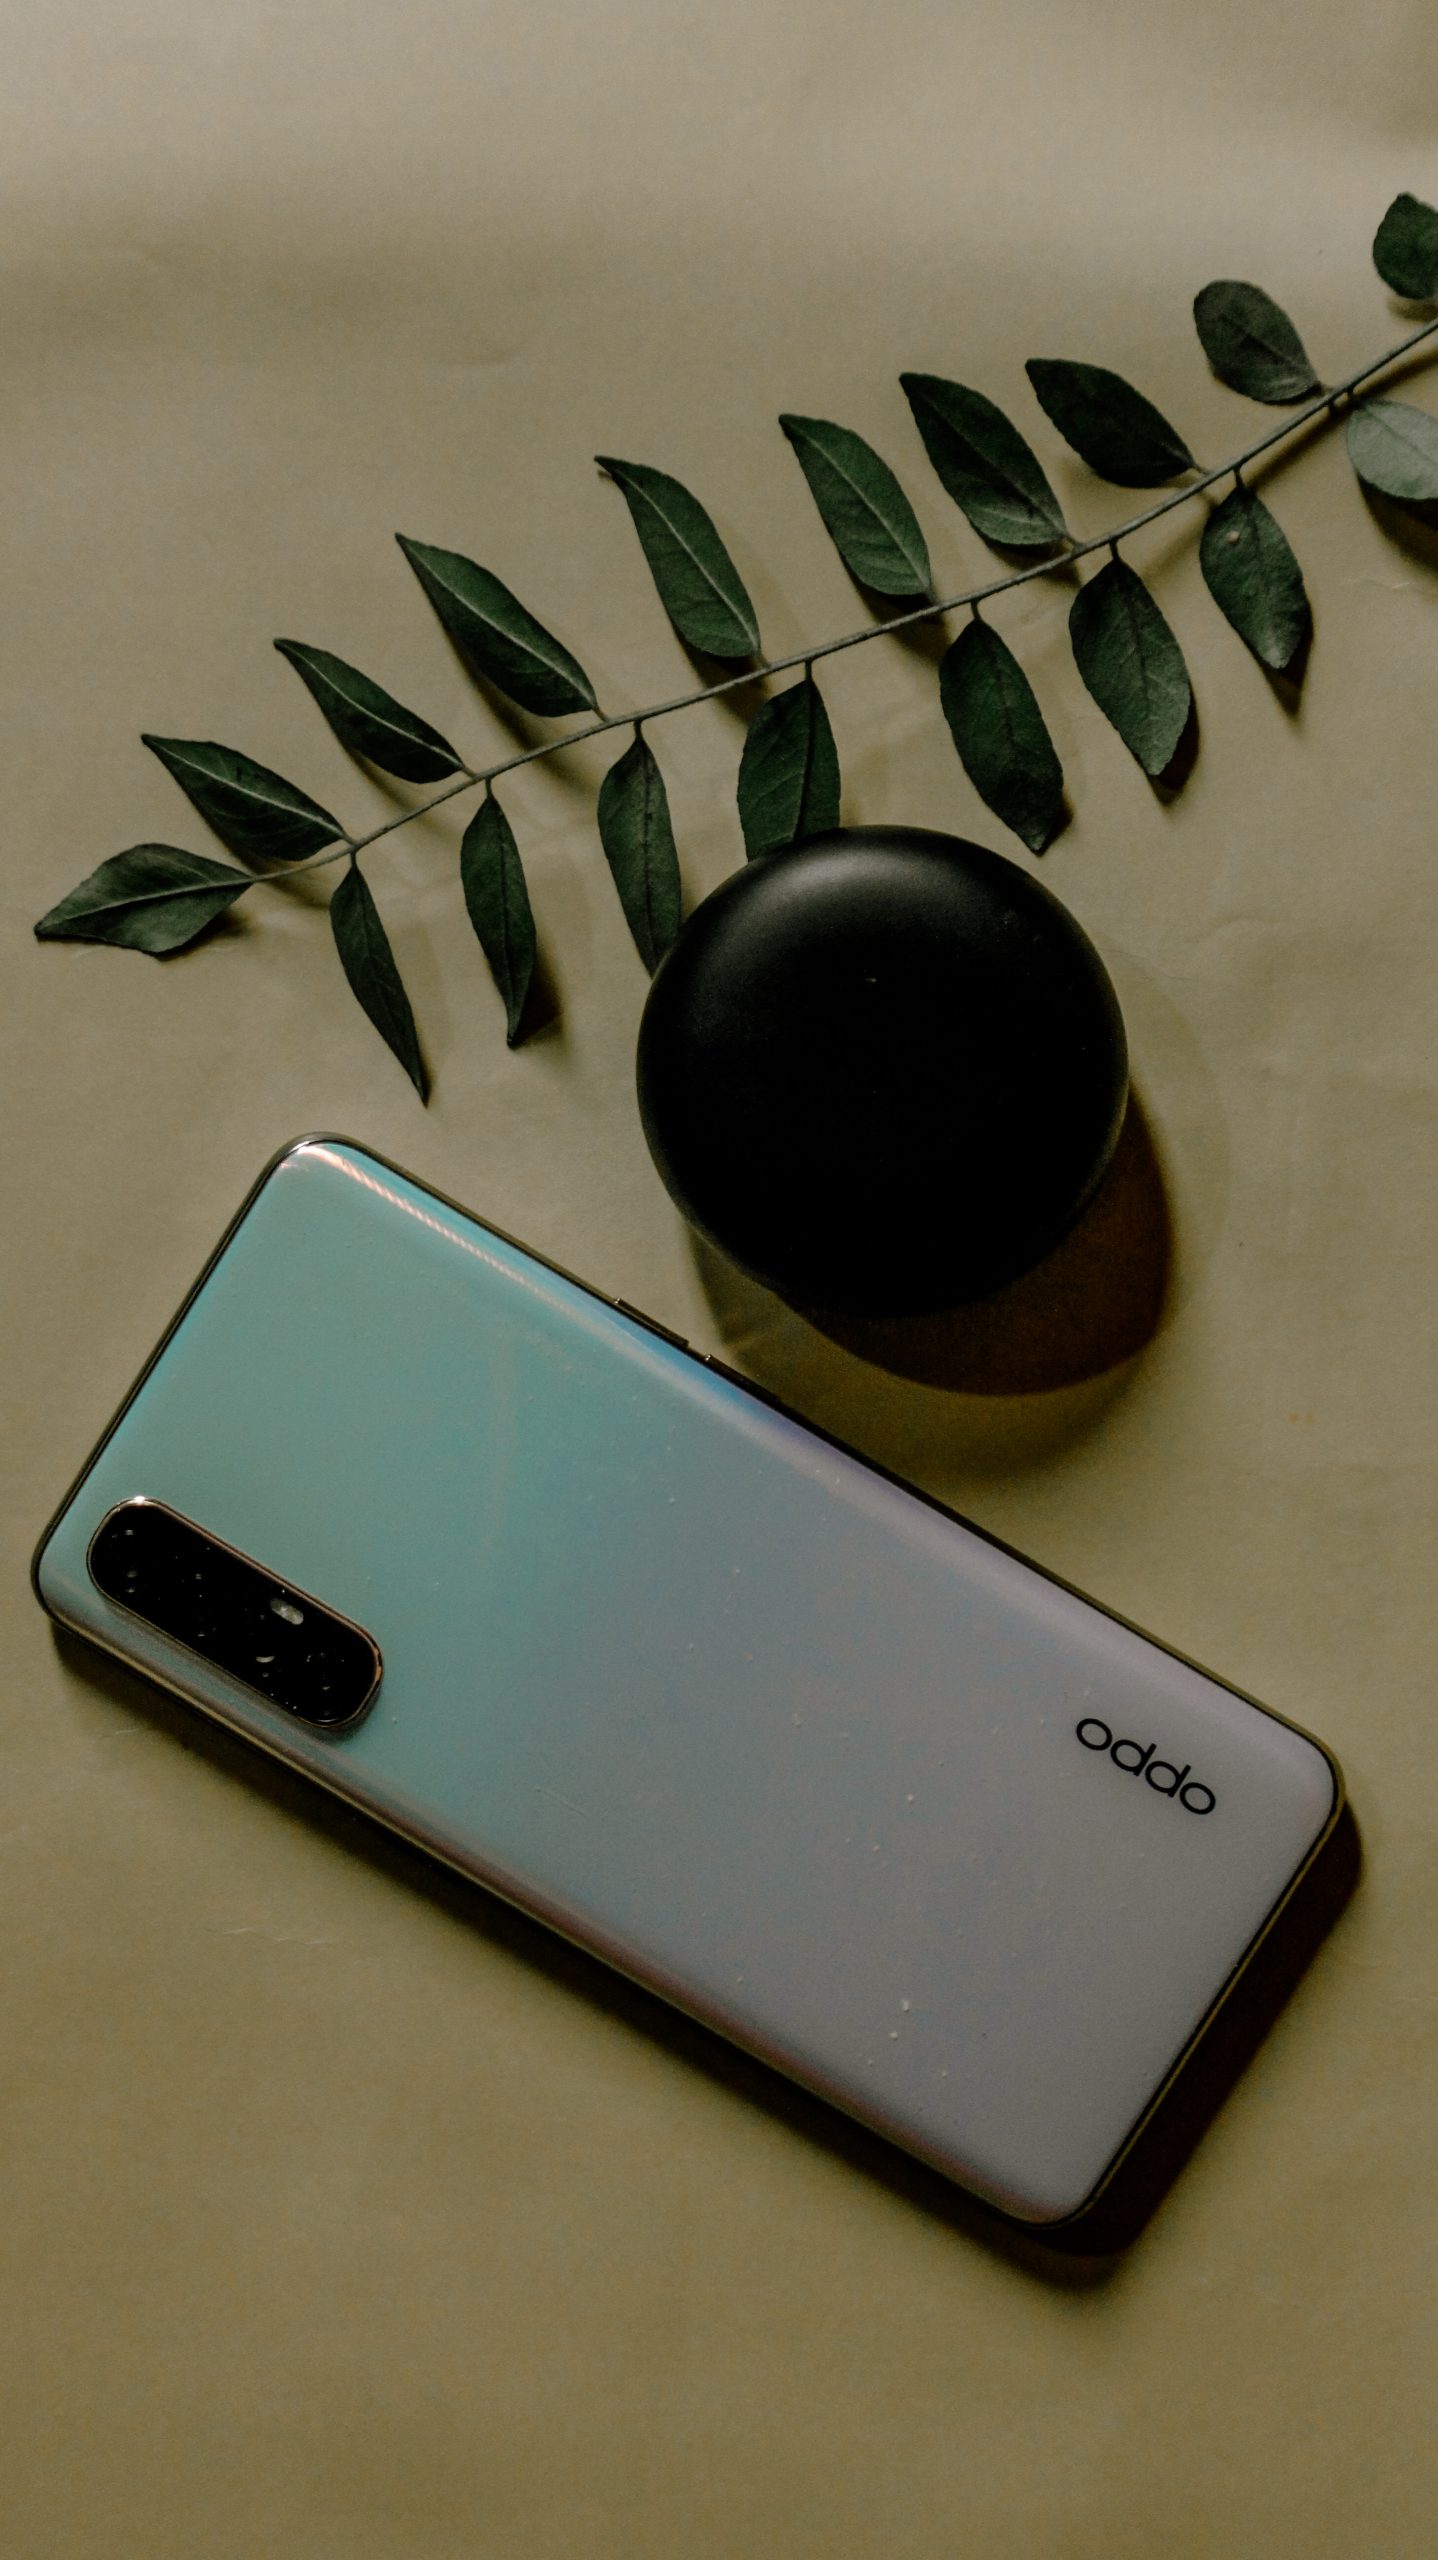 Oppo mobile and plant leaf